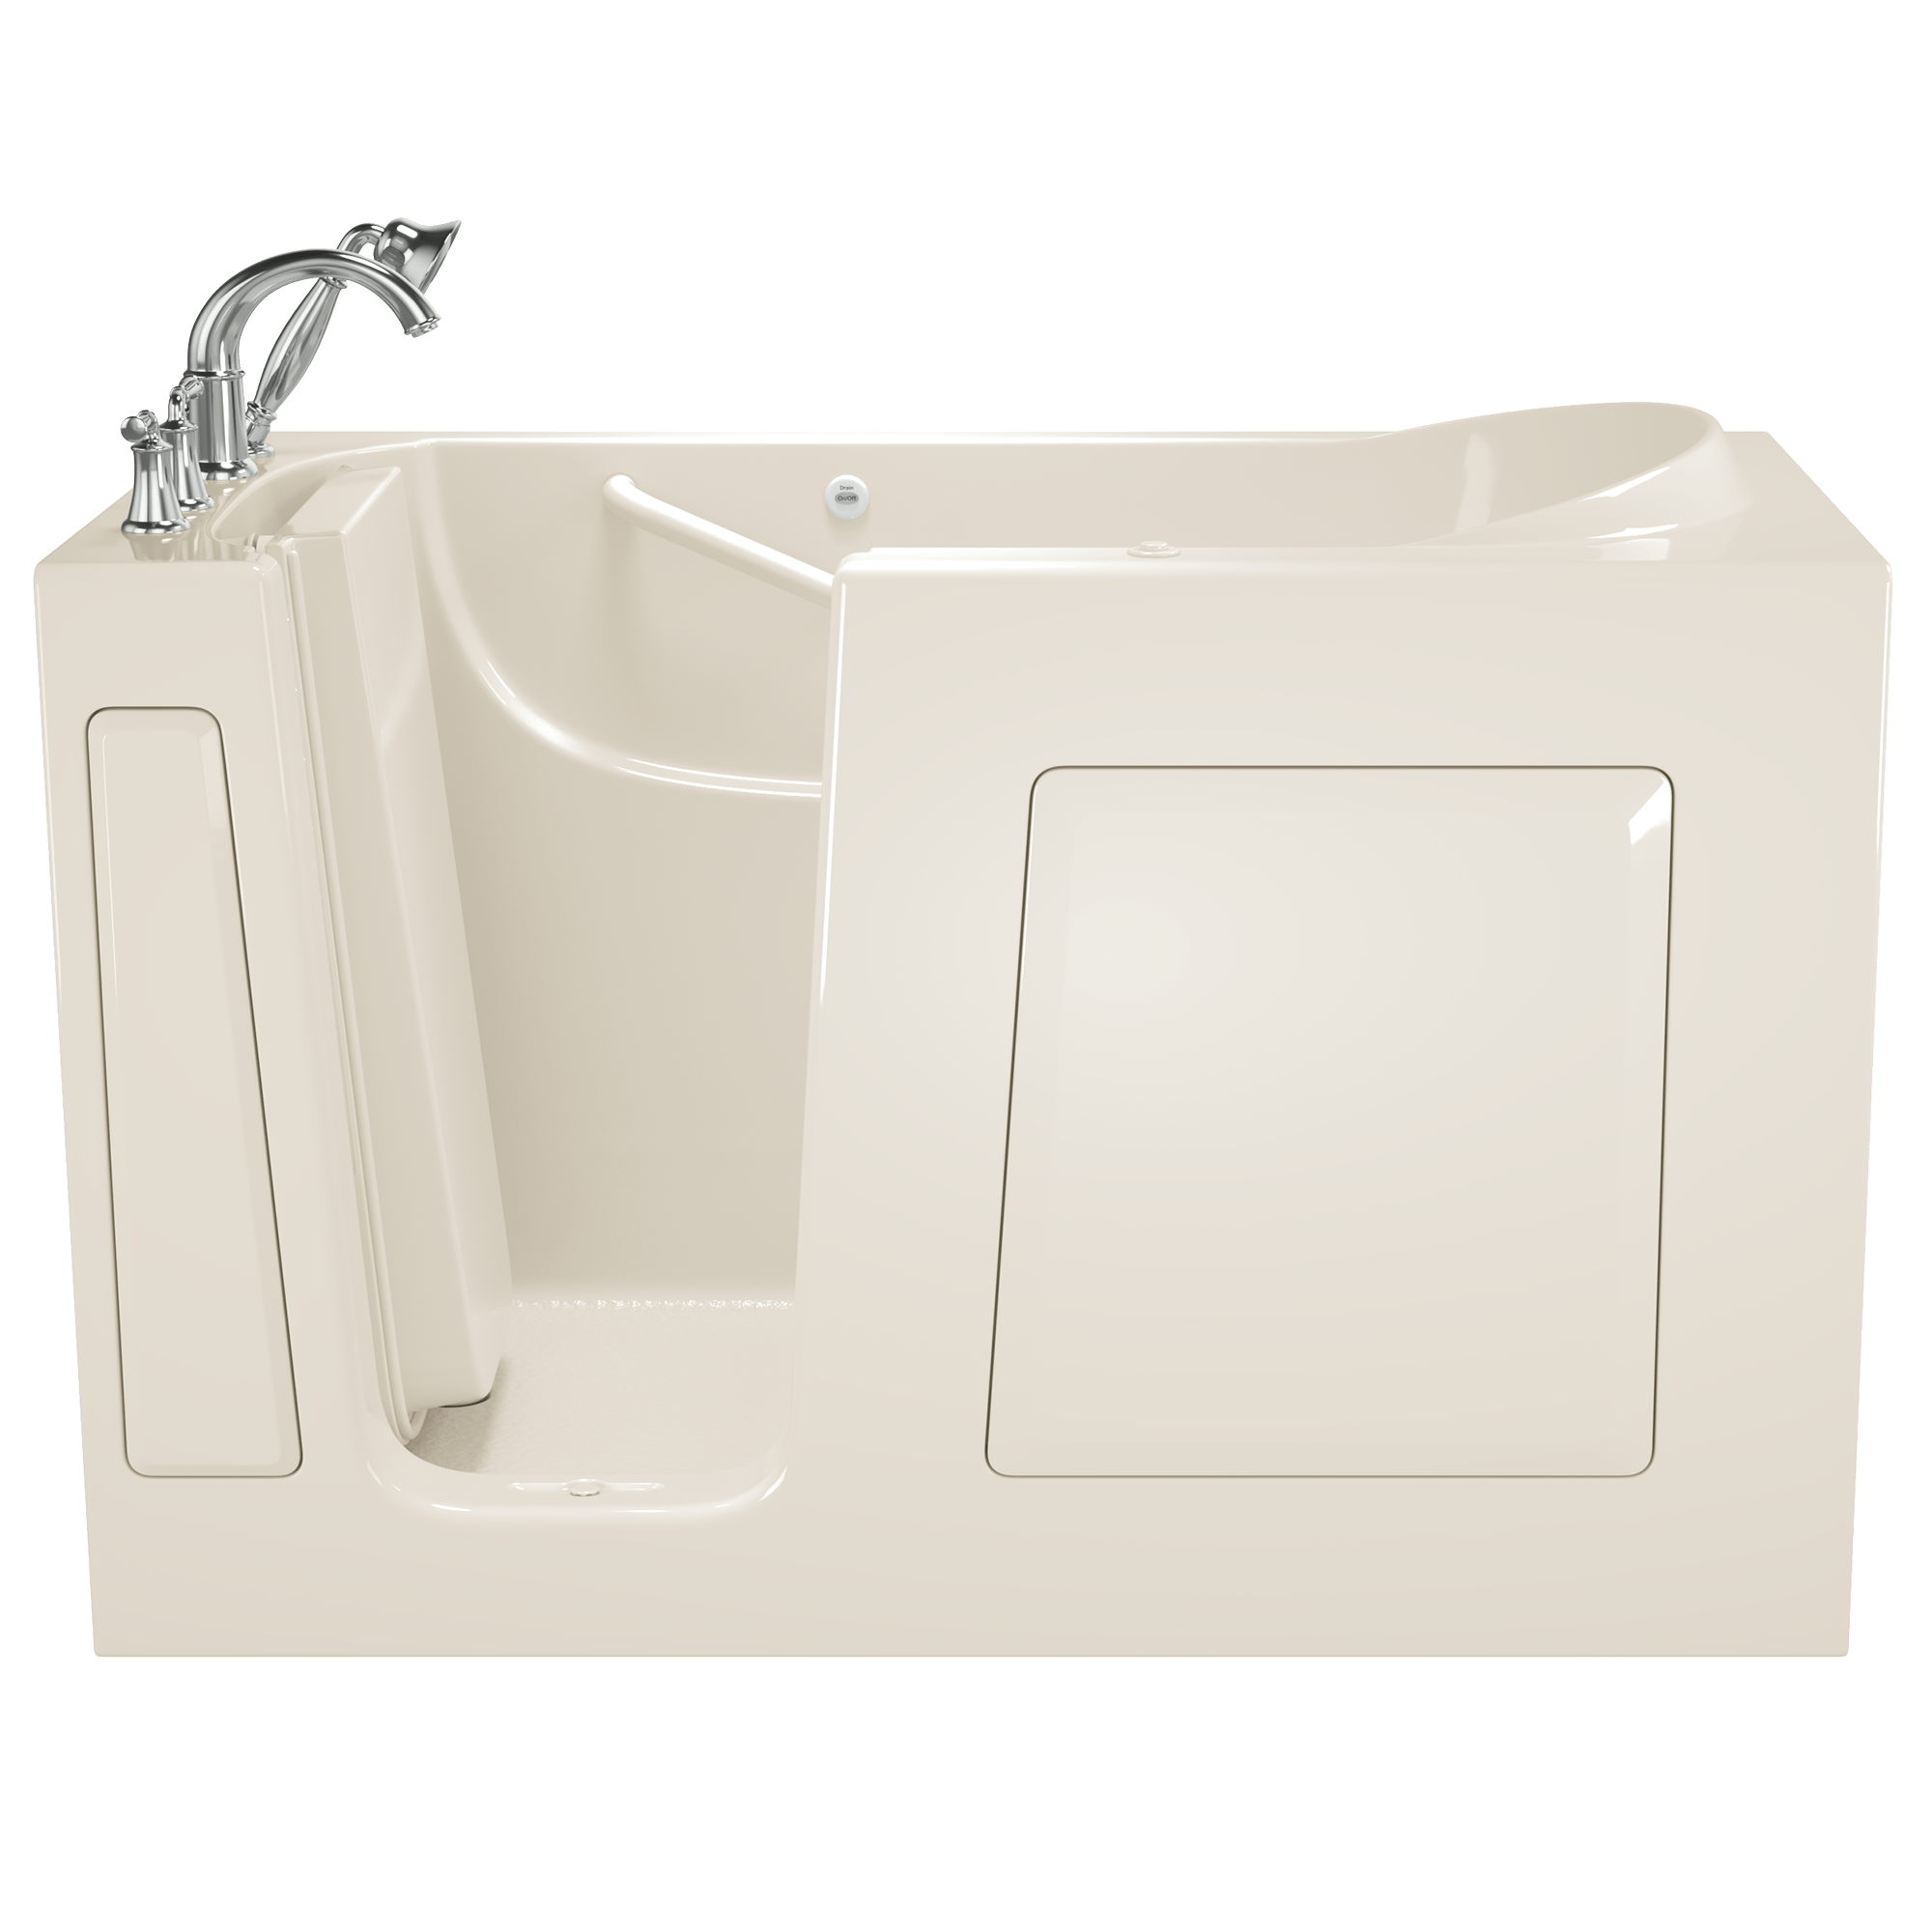 Gelcoat Value Series 30x60 Inch Walk-In Bathtub with Whirlpool Massage System - Left Hand Door and Drain